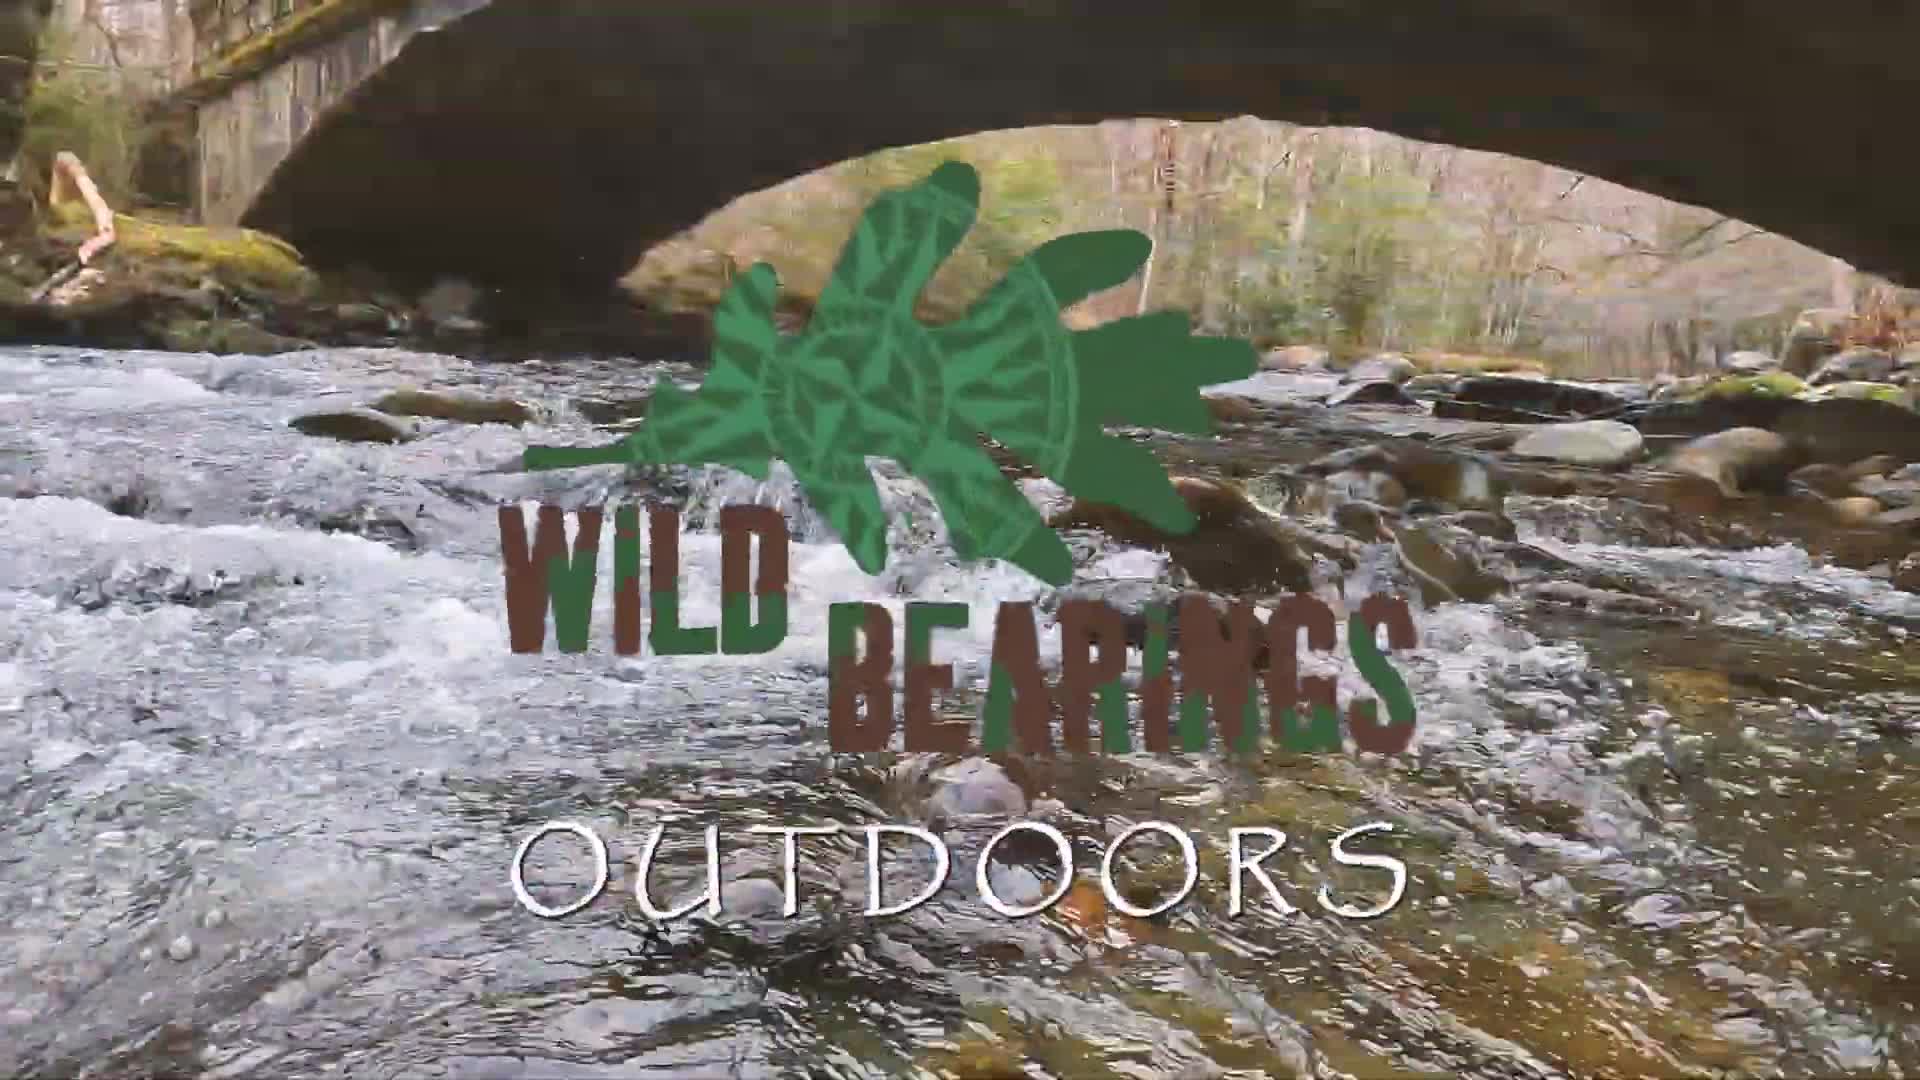 Load video: Promotional video for Wild Bearings Outdoors with glimpses of beautiful creeks and streams and Chris Sloan and Sam Johnson fly fishing them.